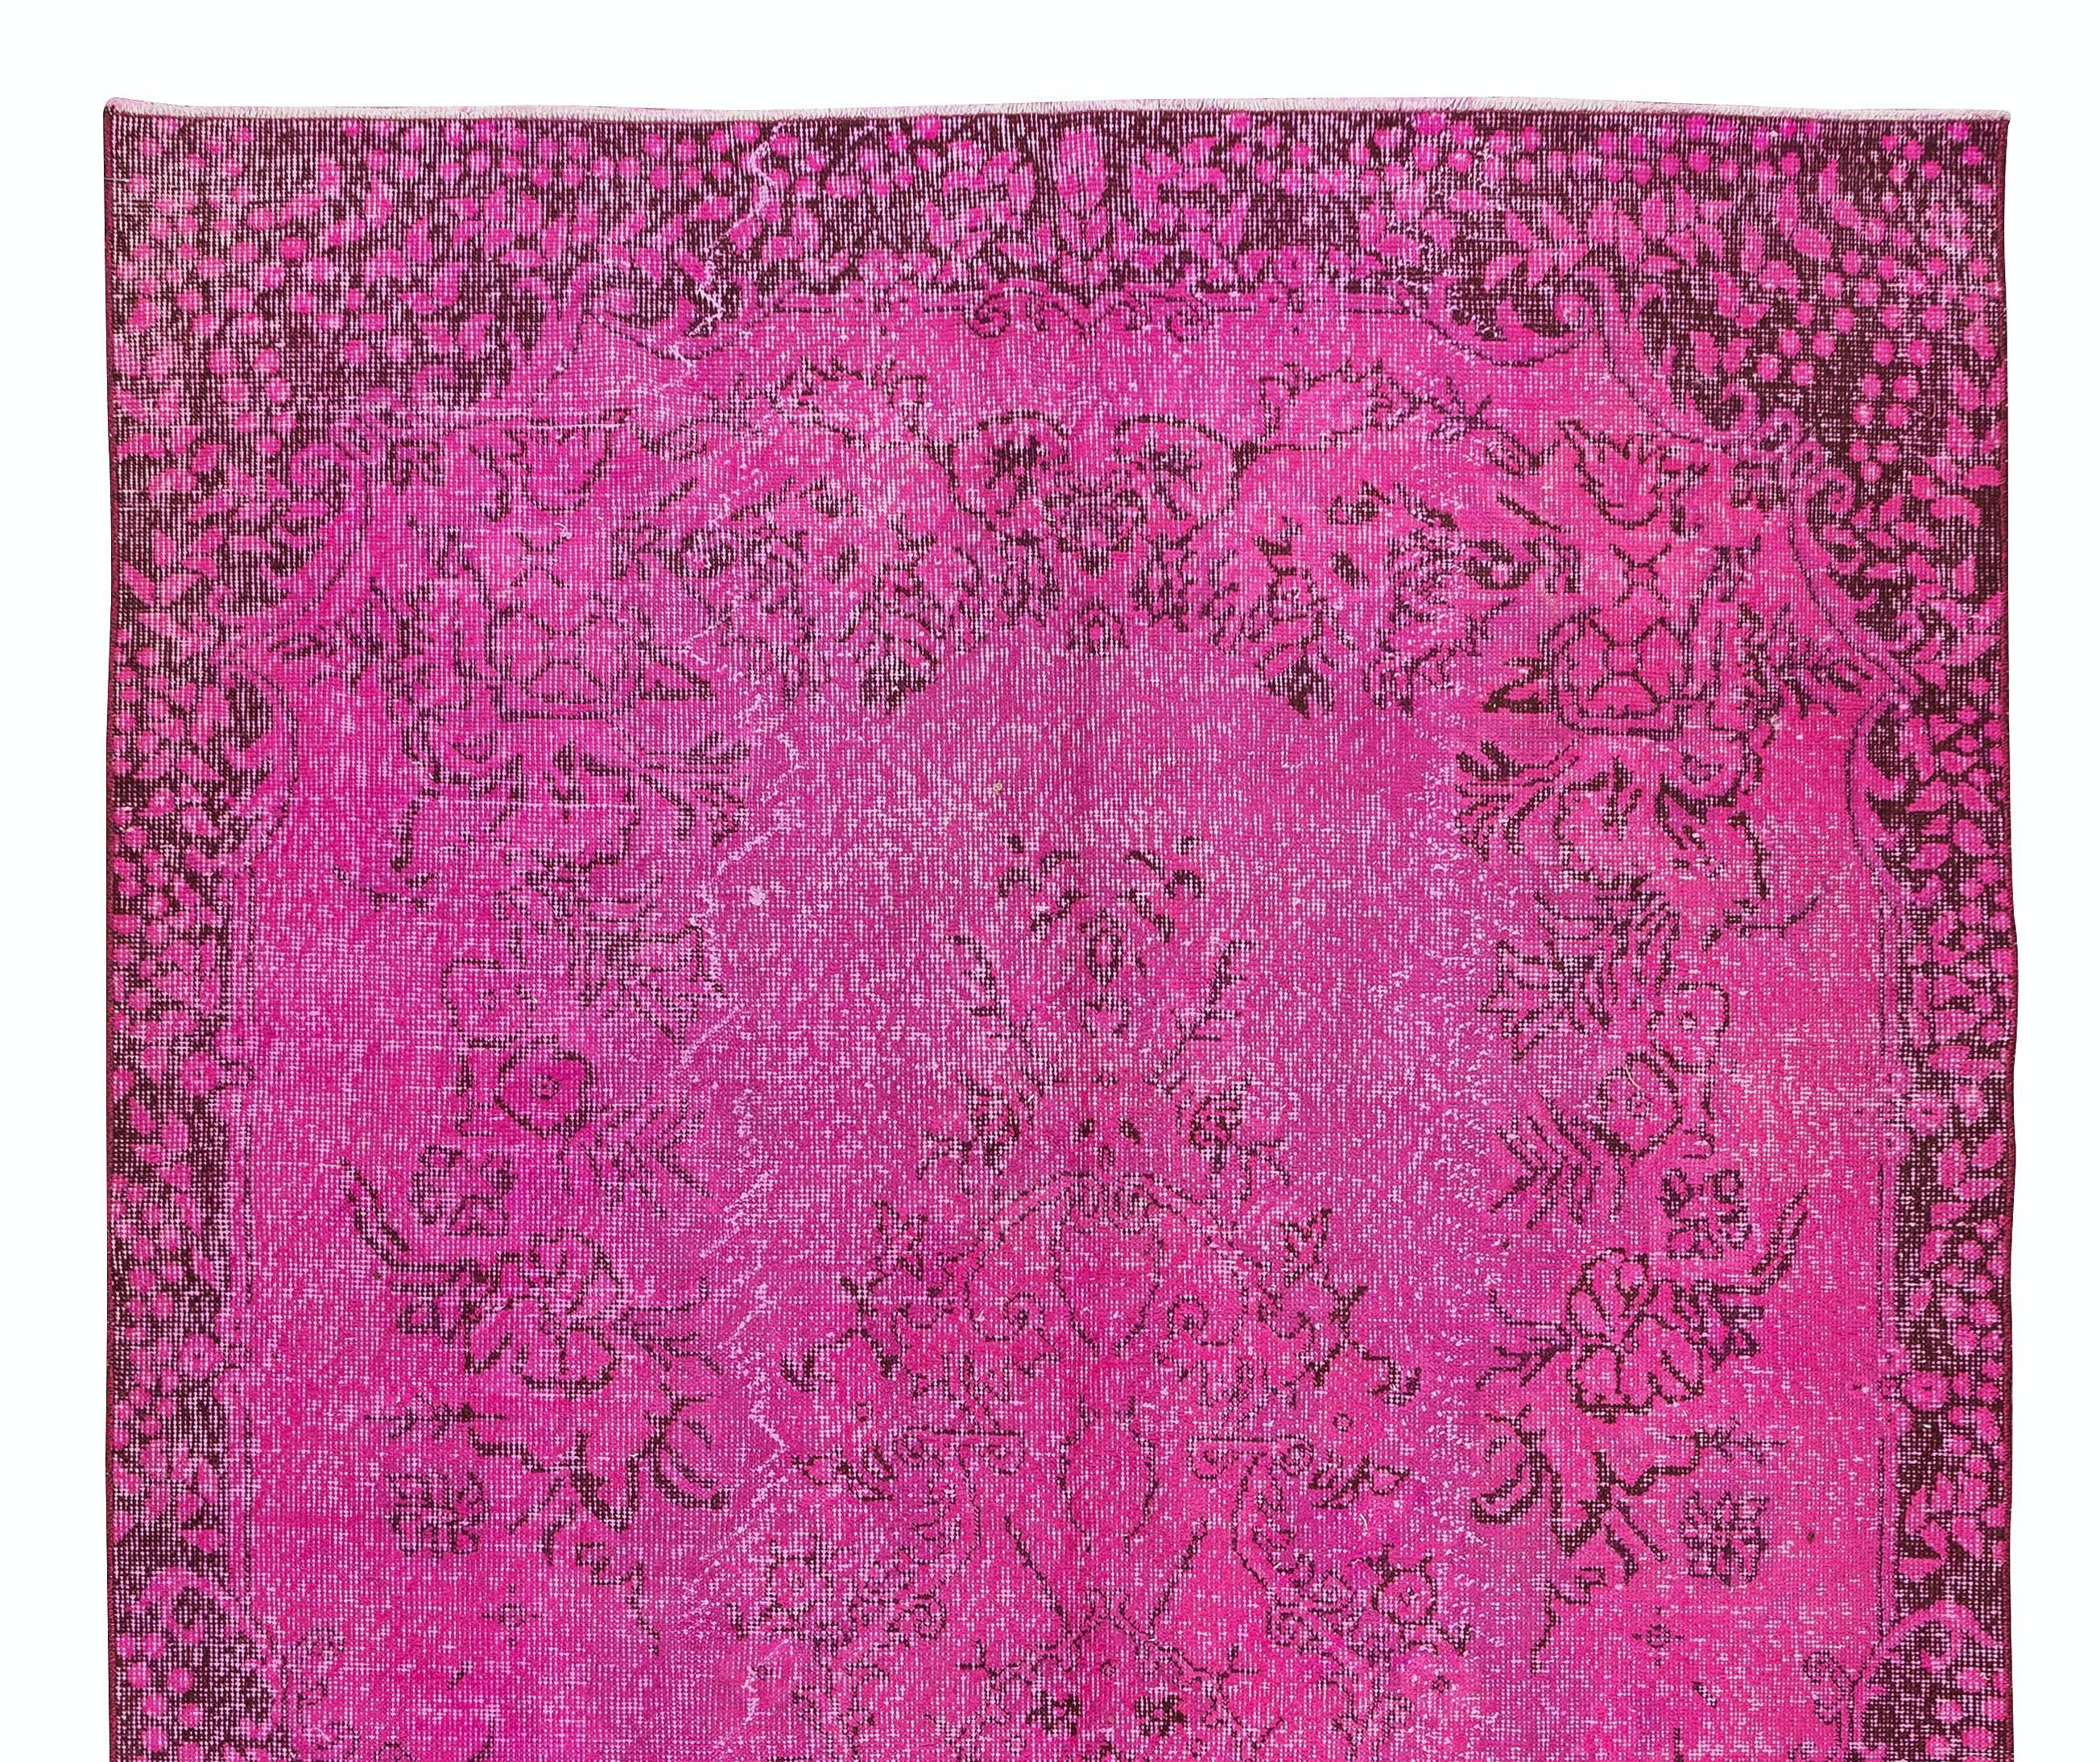 Hand-Woven 5.6x9.8 Ft Vintage Handmade Turkish Area Rug in Pink with Medallion Design For Sale